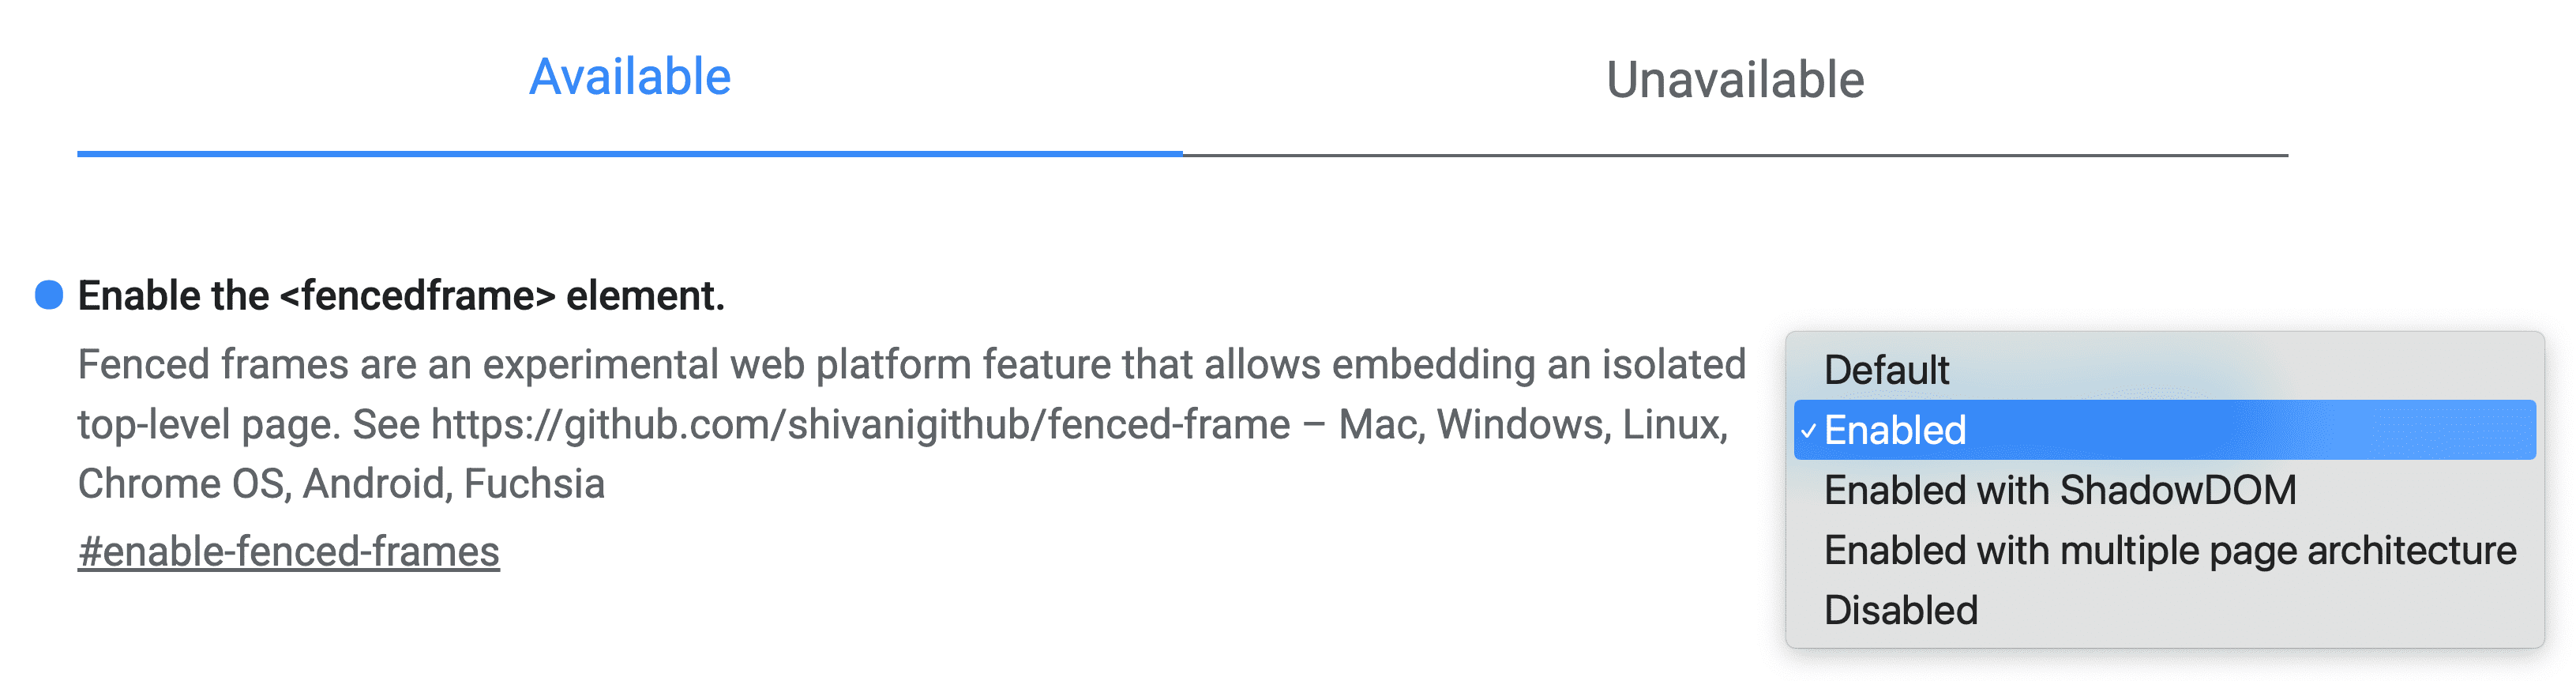 Chrome Experiments で Enable the Fenced frame element というフラグを Enabled に設定する